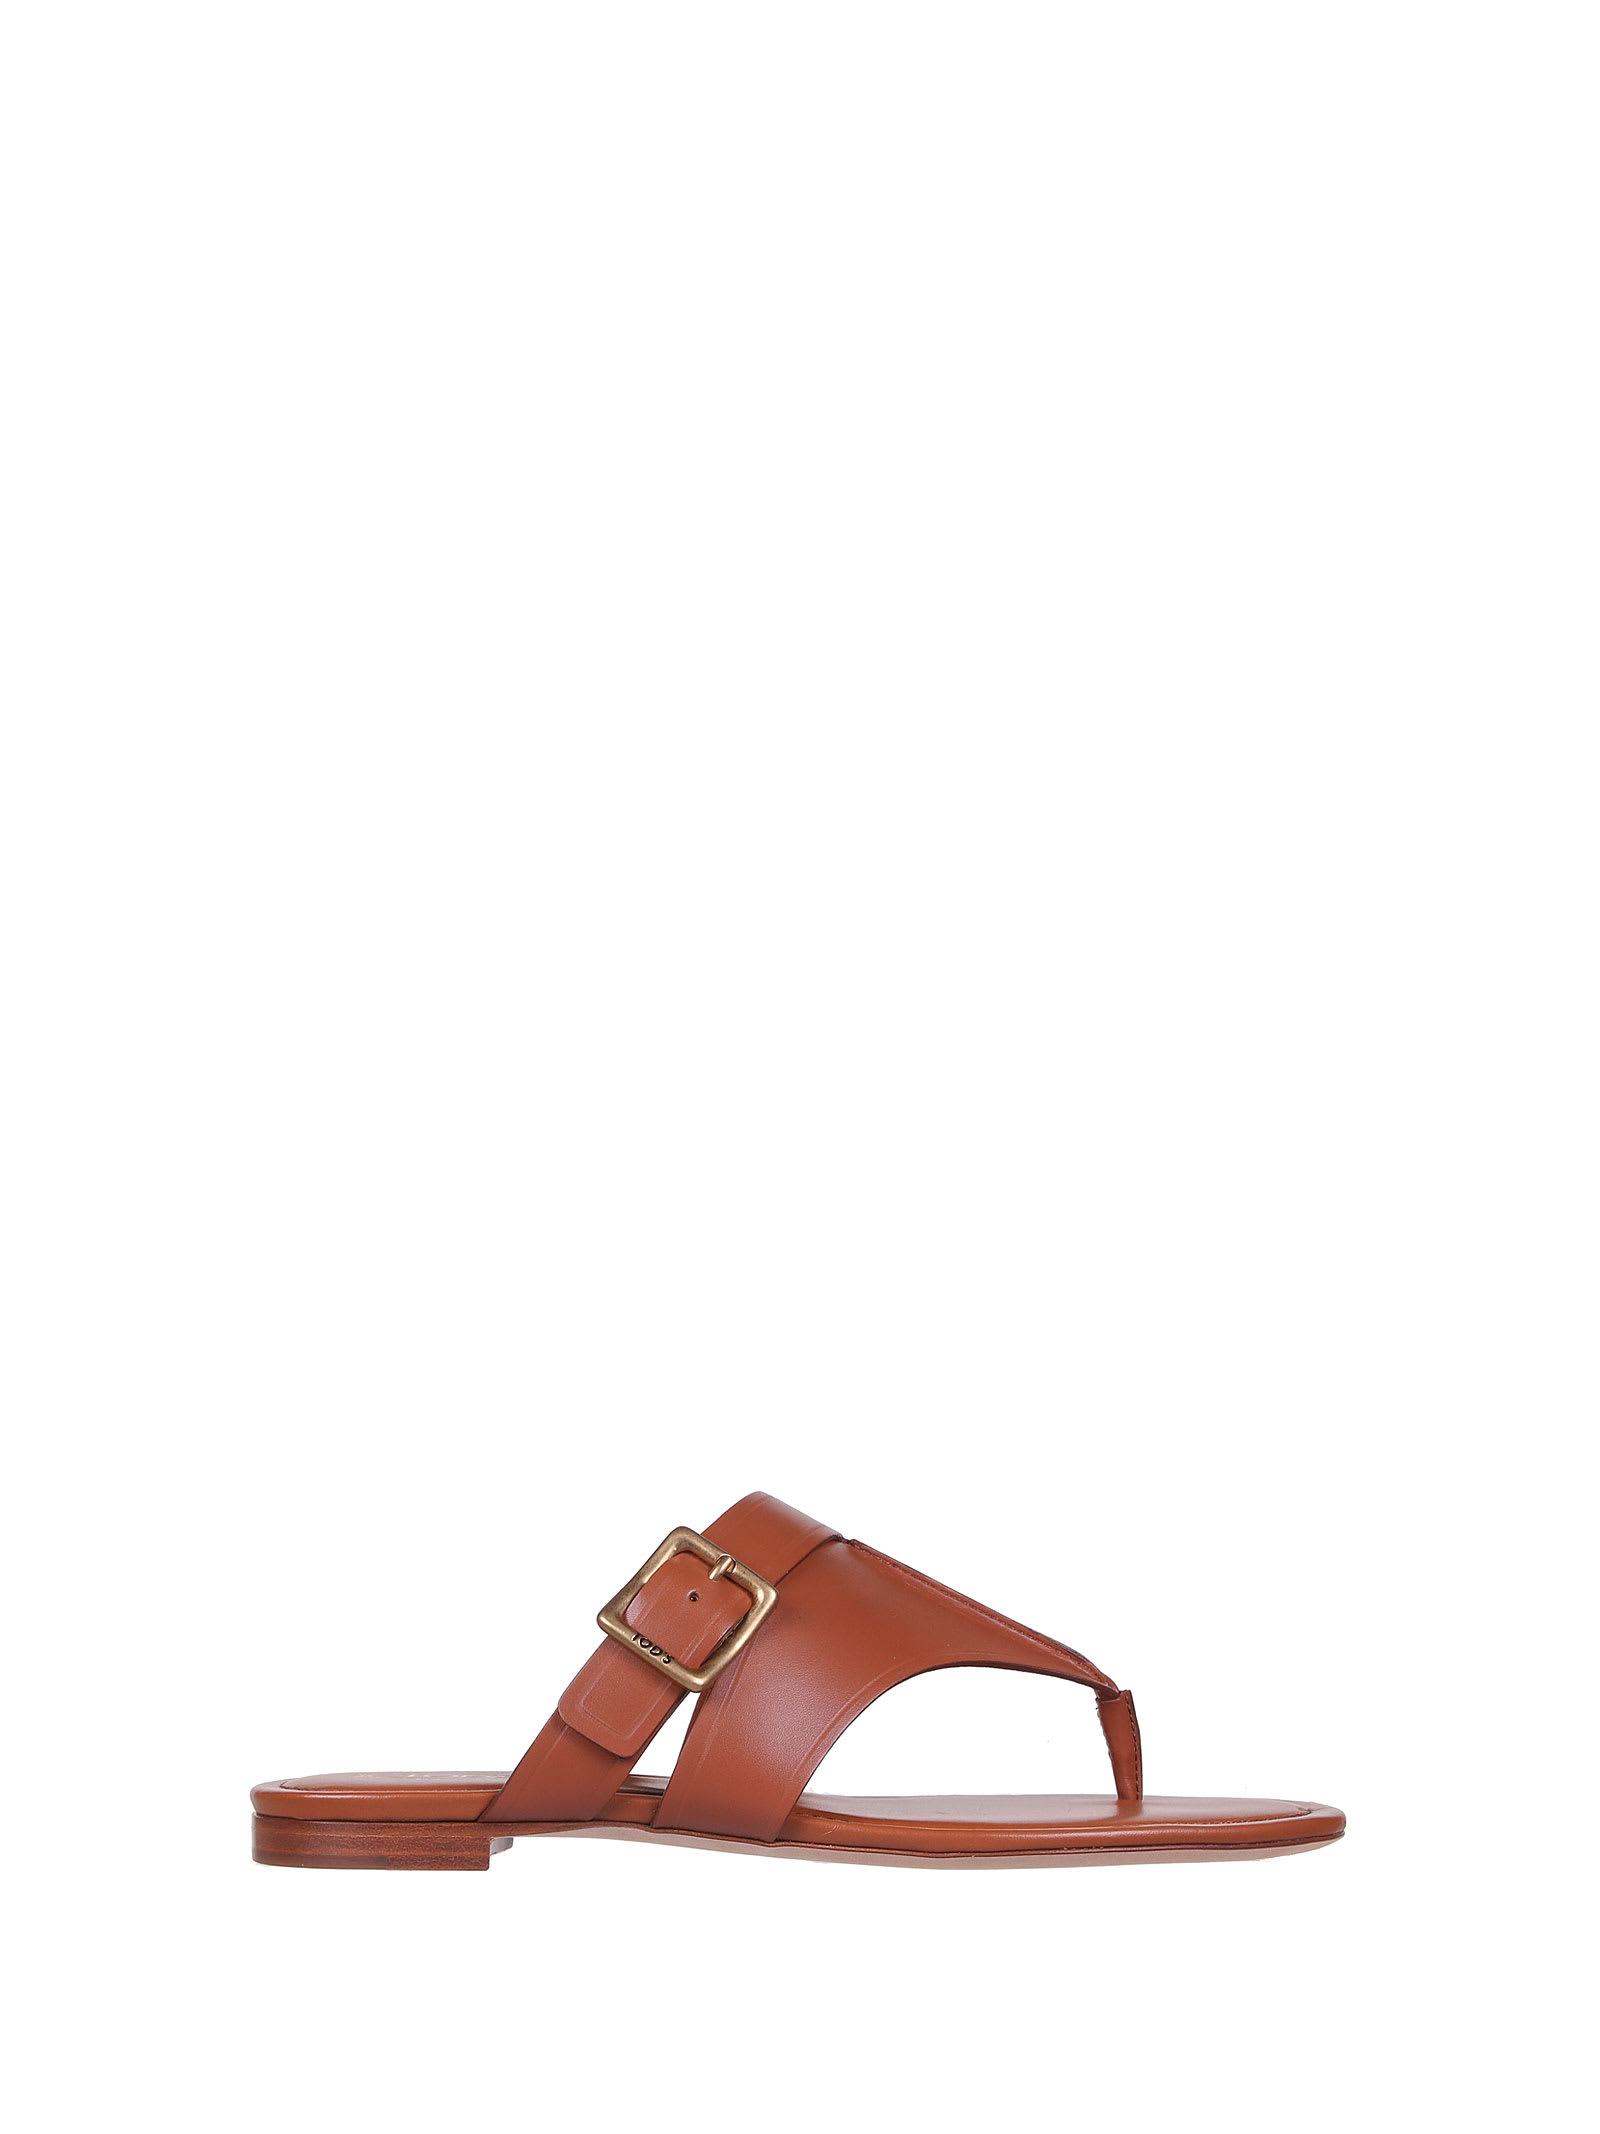 Photo of  Tods Thong Sandals In Tan Leather- shop Tods Sandals online sales